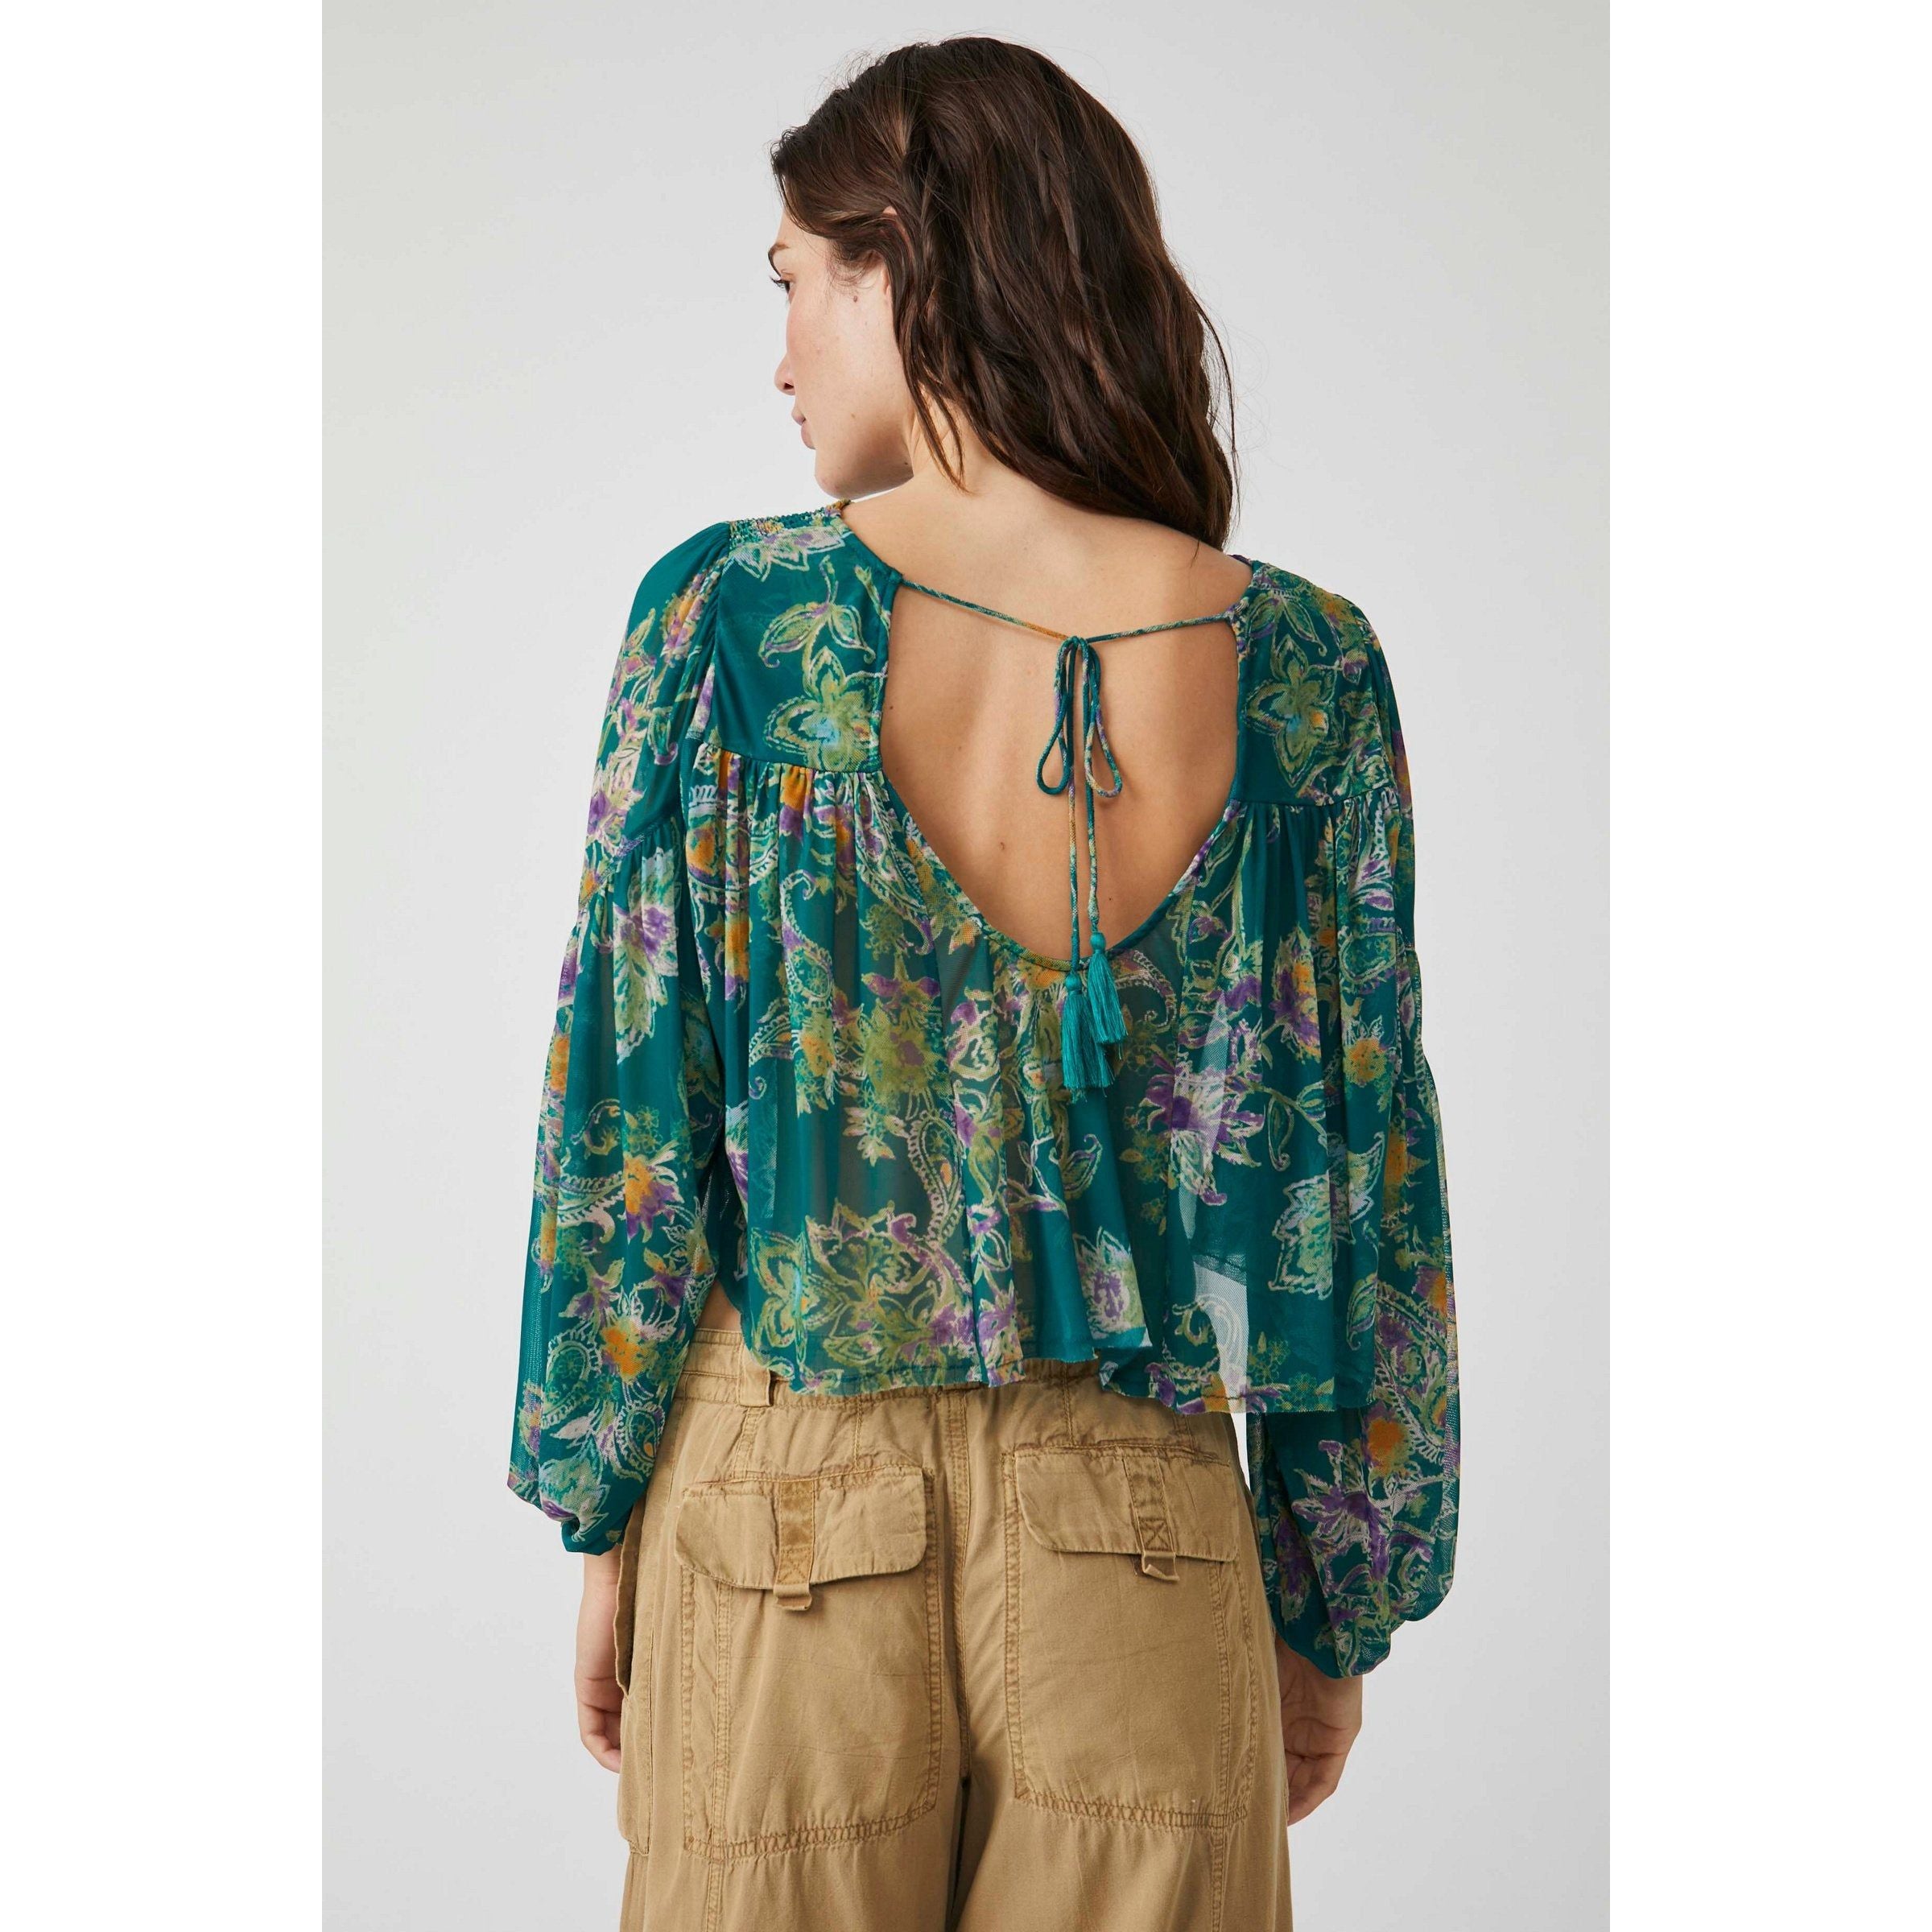 Free People - Up For Anything Top in Emerald-SQ4504122